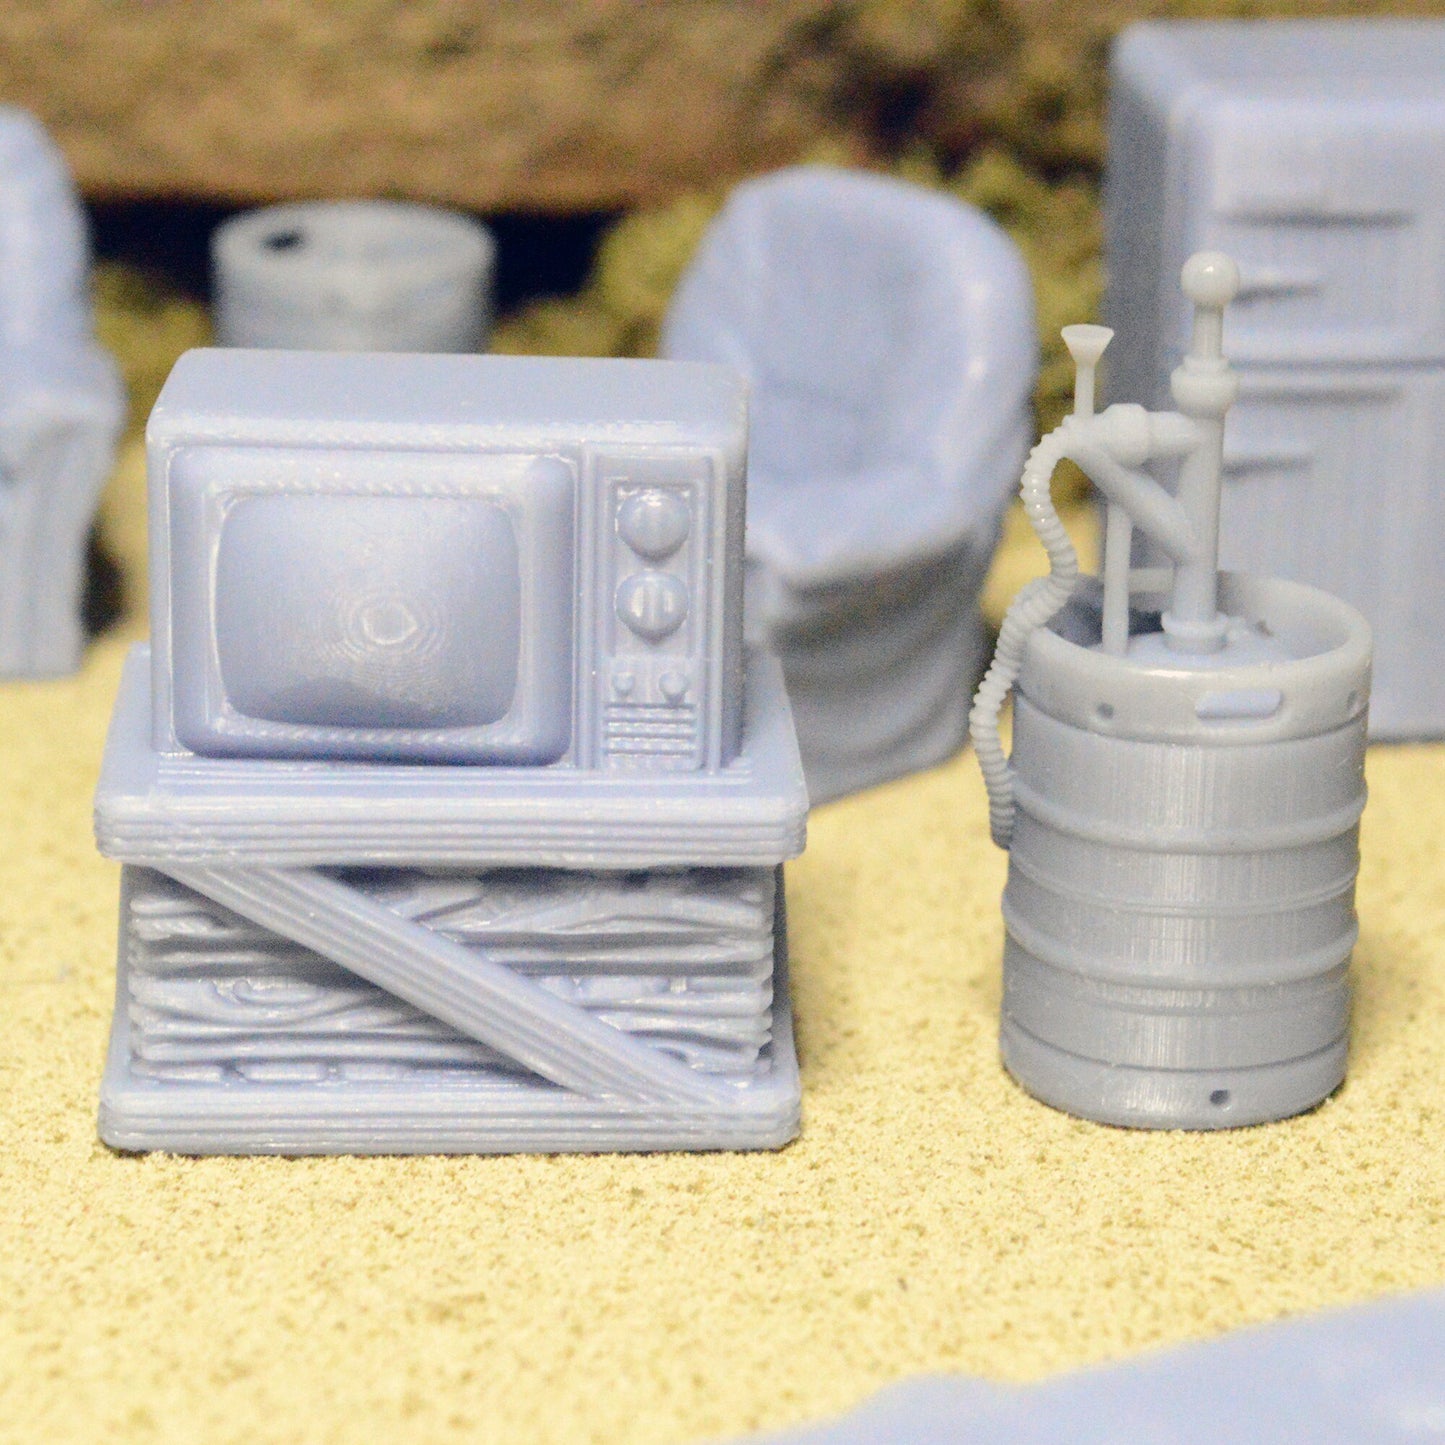 Clean Wasteland Furniture 20mm 28mm 32mm for Gaslands Terrain, Fallout Urban Post-Apocalyptic, This is Not a Test